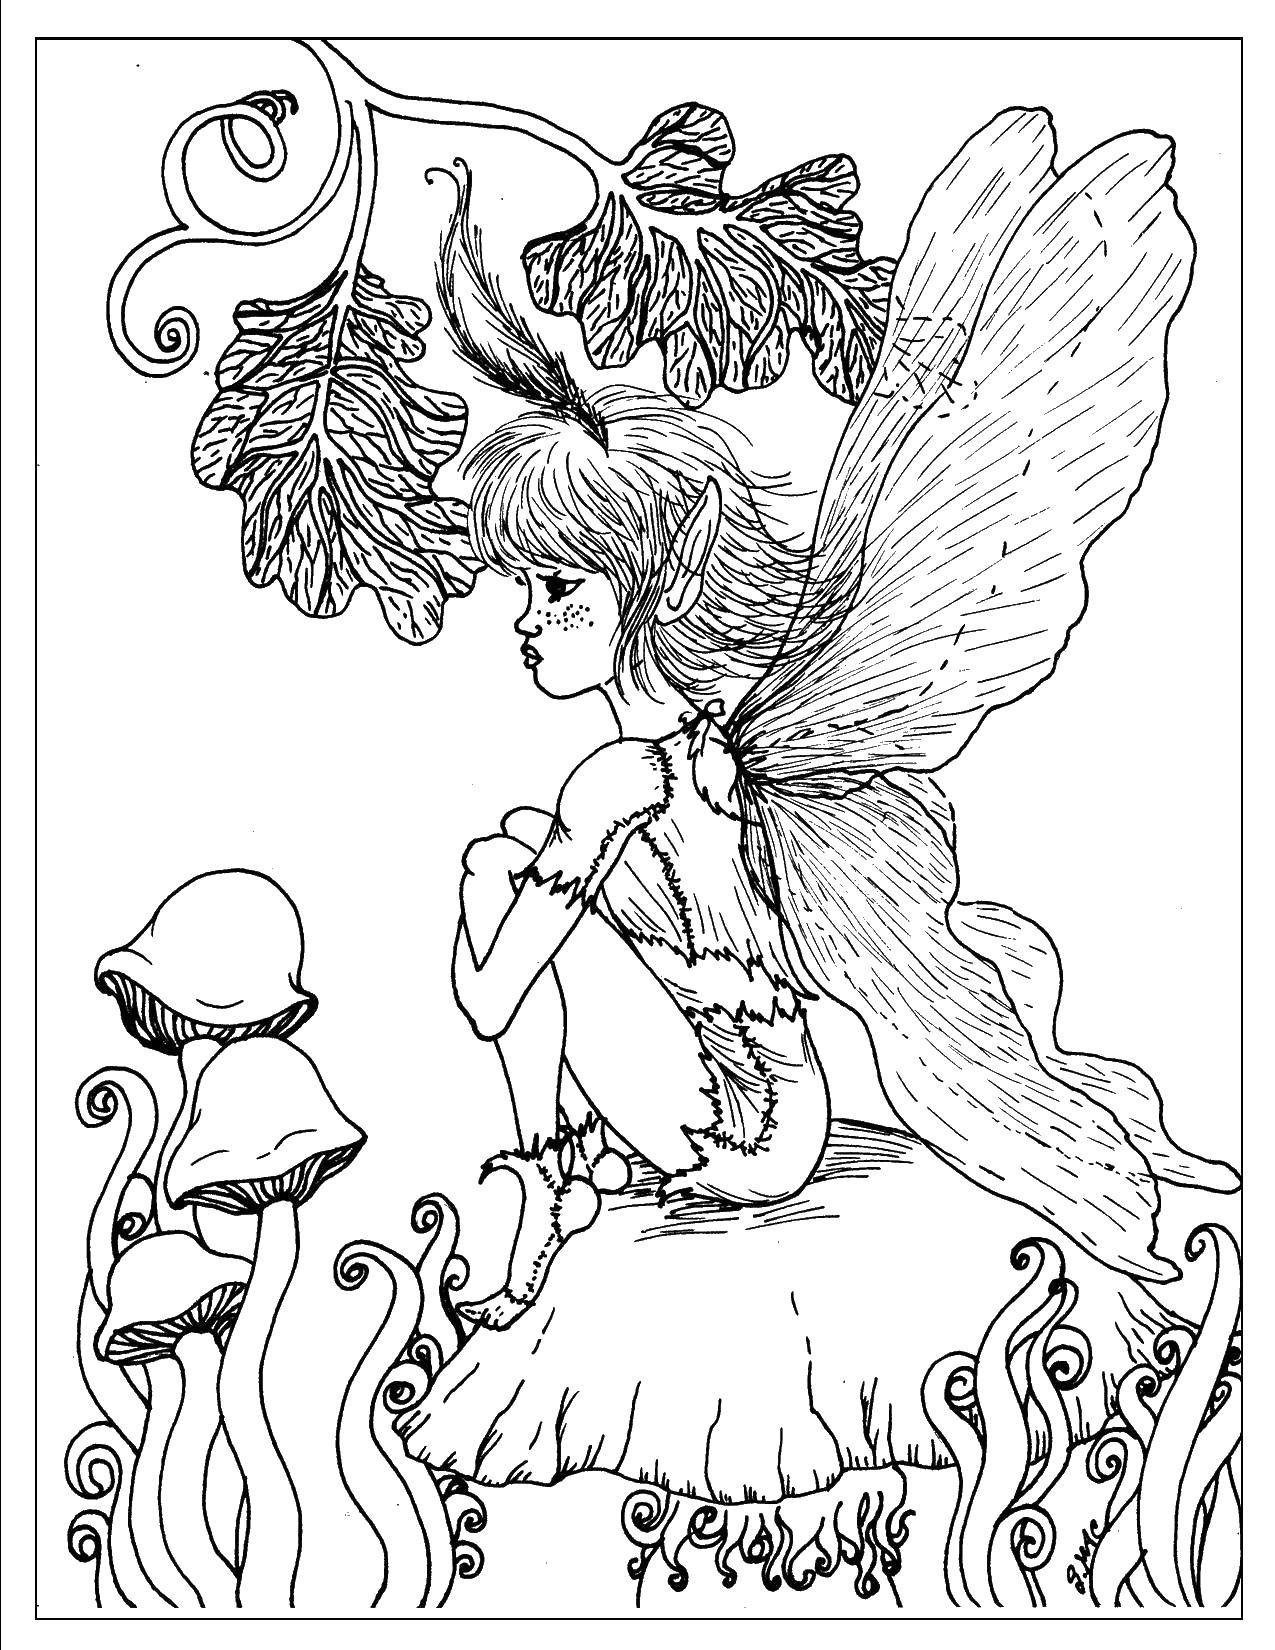 Coloring Little fairy. Category coloring pages for girls. Tags:  fairy, mushrooms.